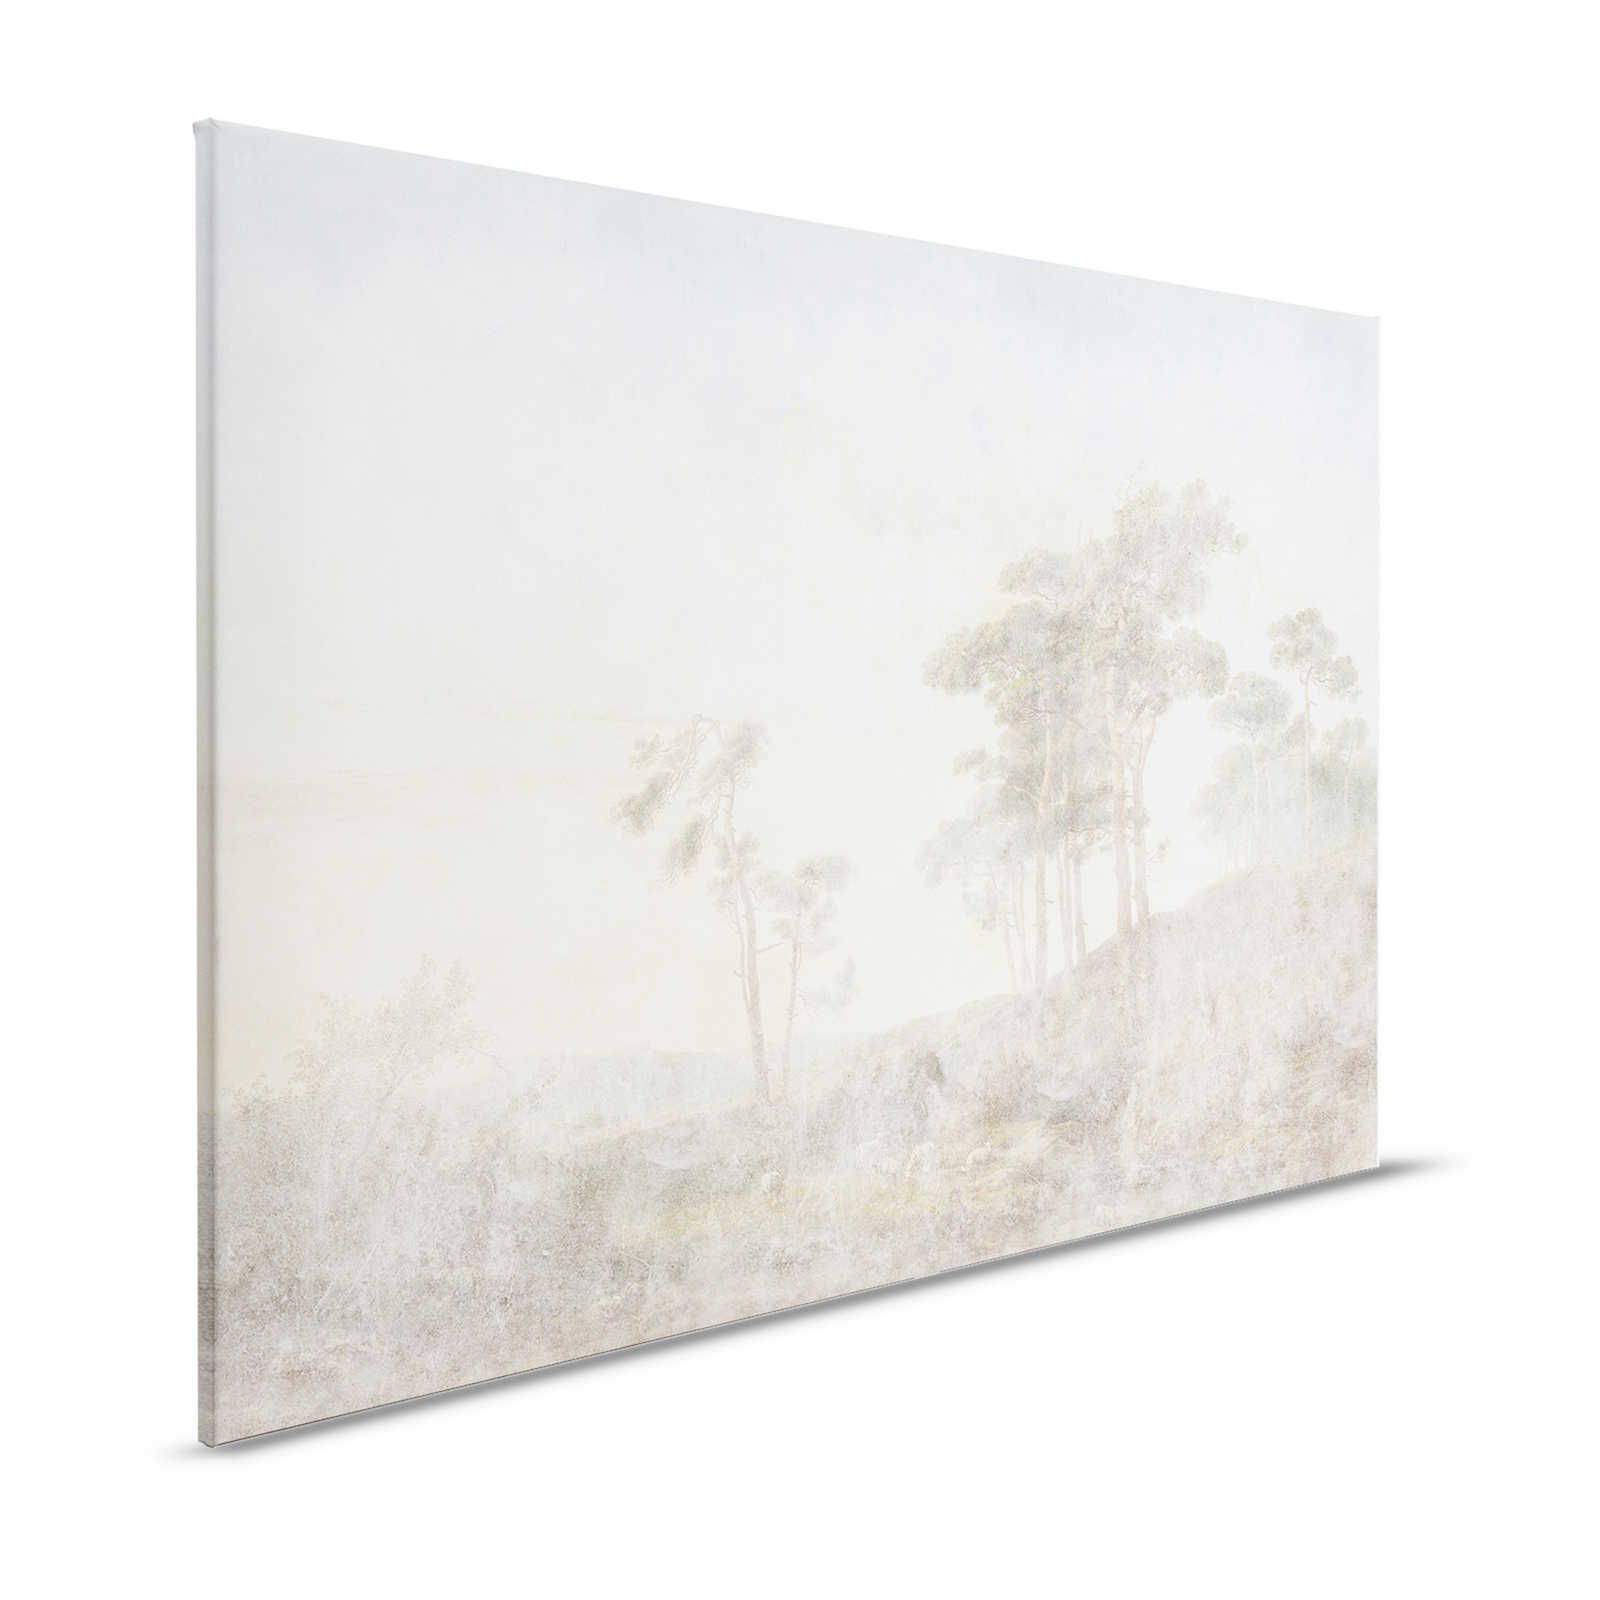 Romantic Grove 1 - Painting Canvas Faded Used Look - 1.20 m x 0.80 m
